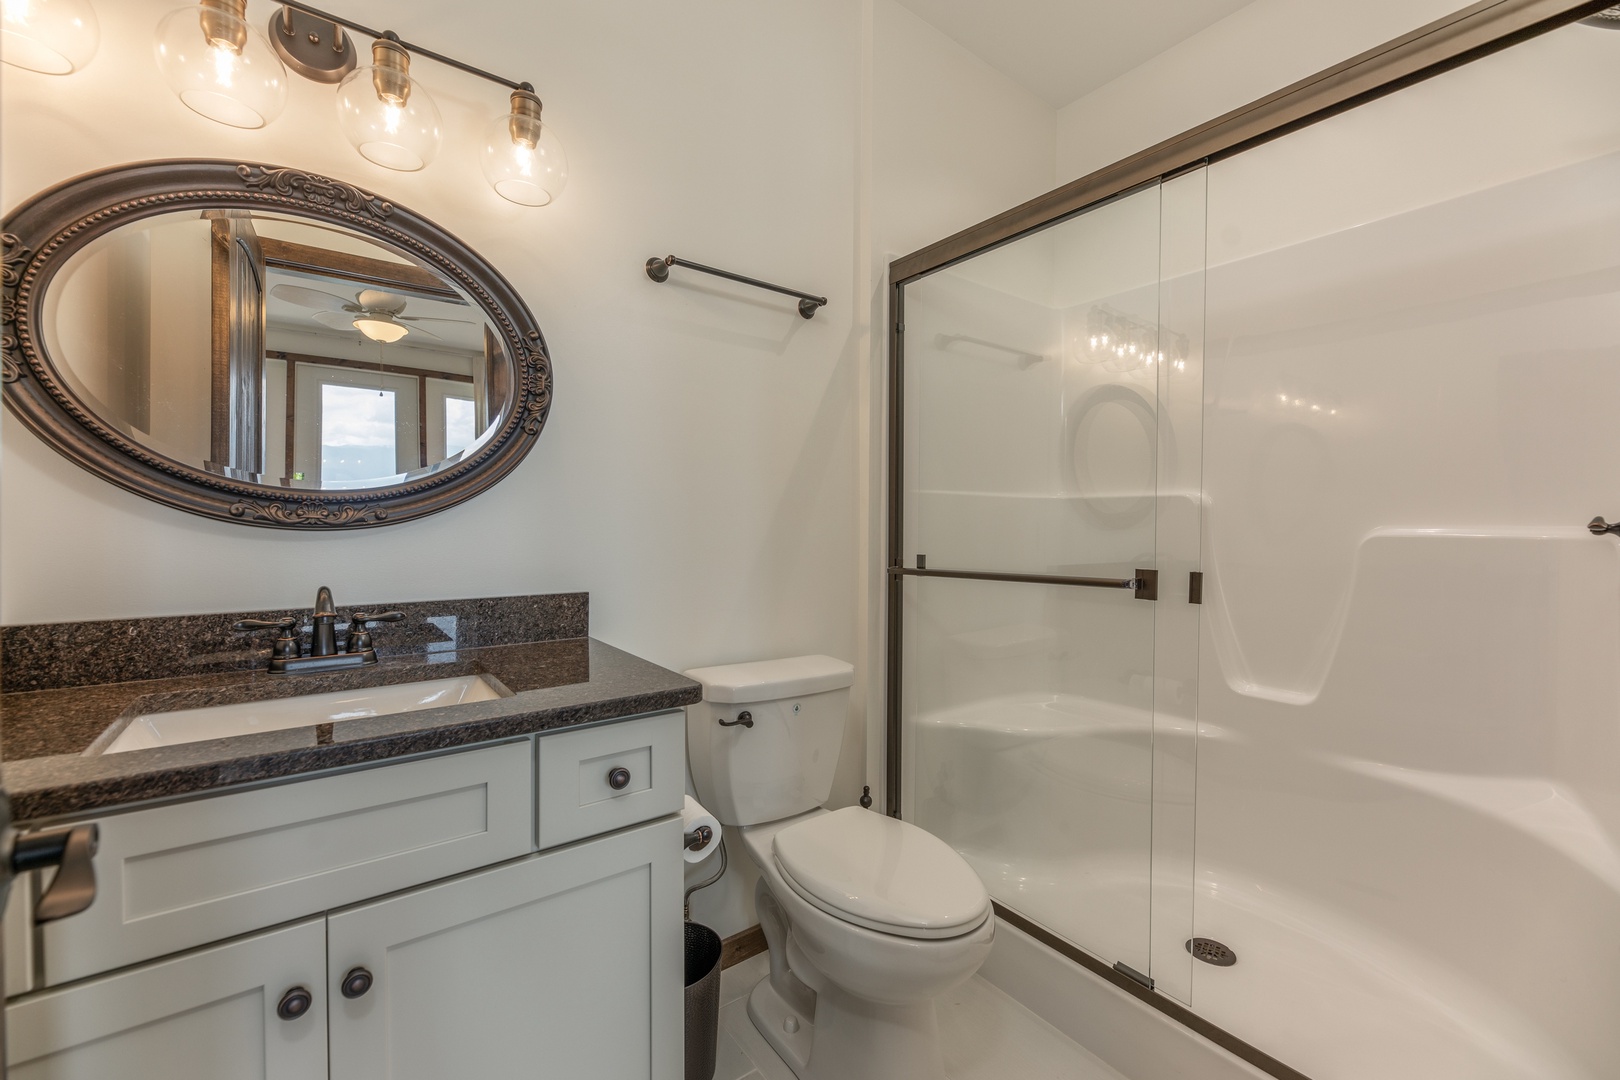 Bathroom with a shower at Mountain Celebration, a 4 bedroom cabin rental located in Gatlinburg